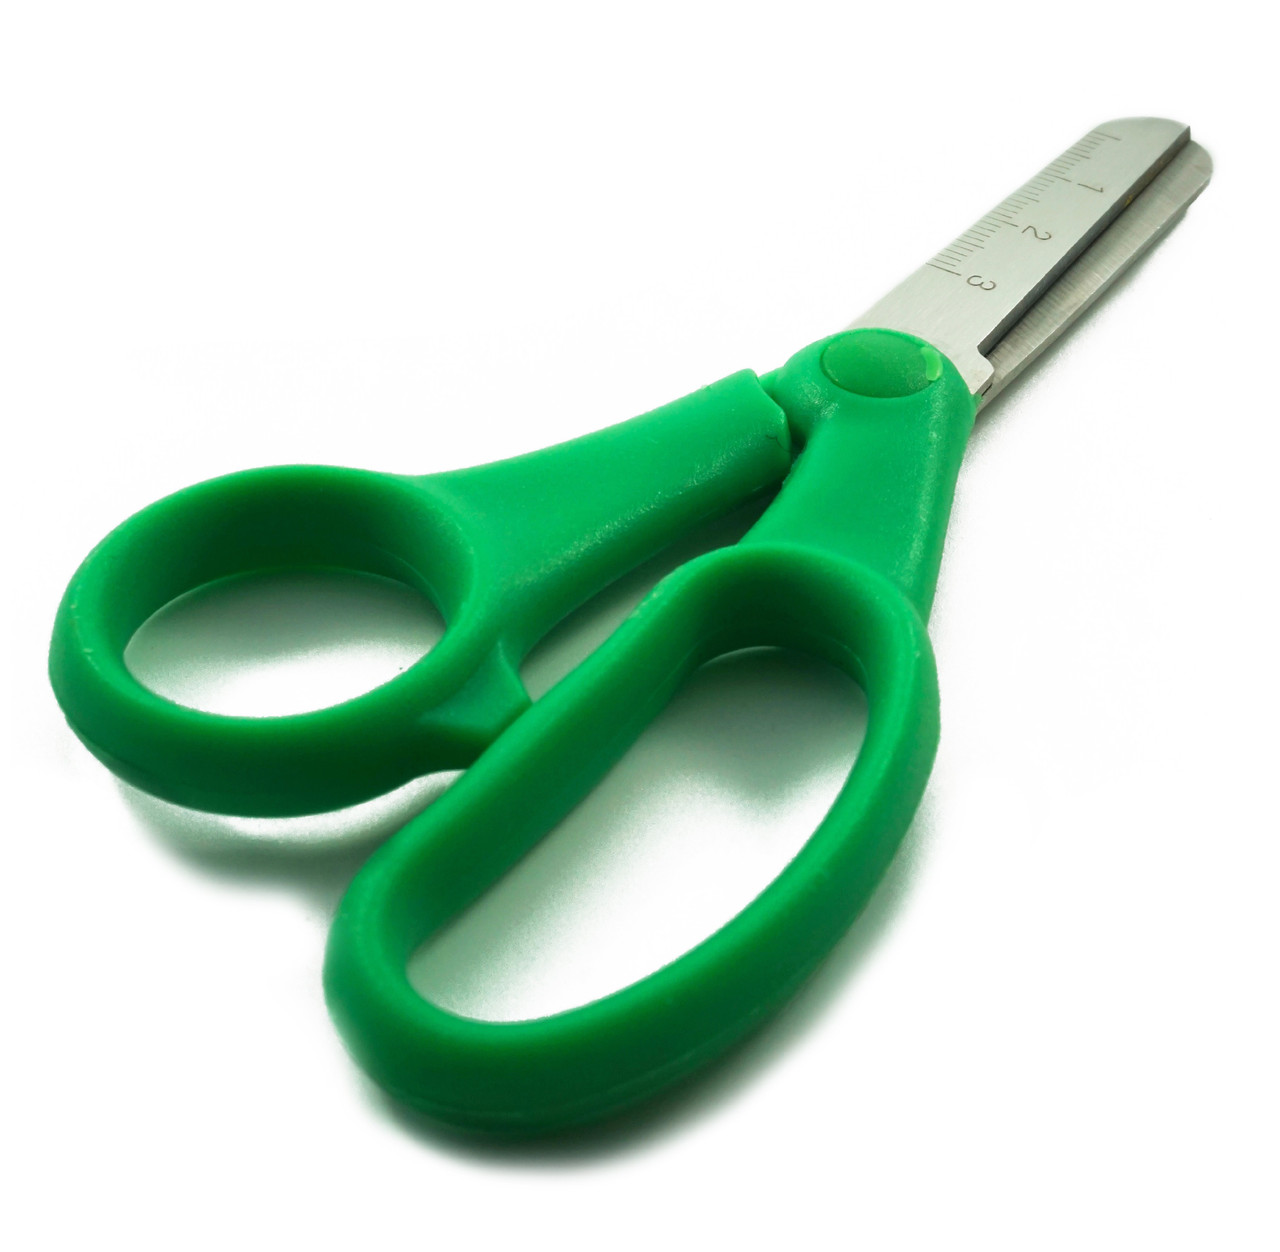 Defender Stainless 3.5-inch Safety Scissors 